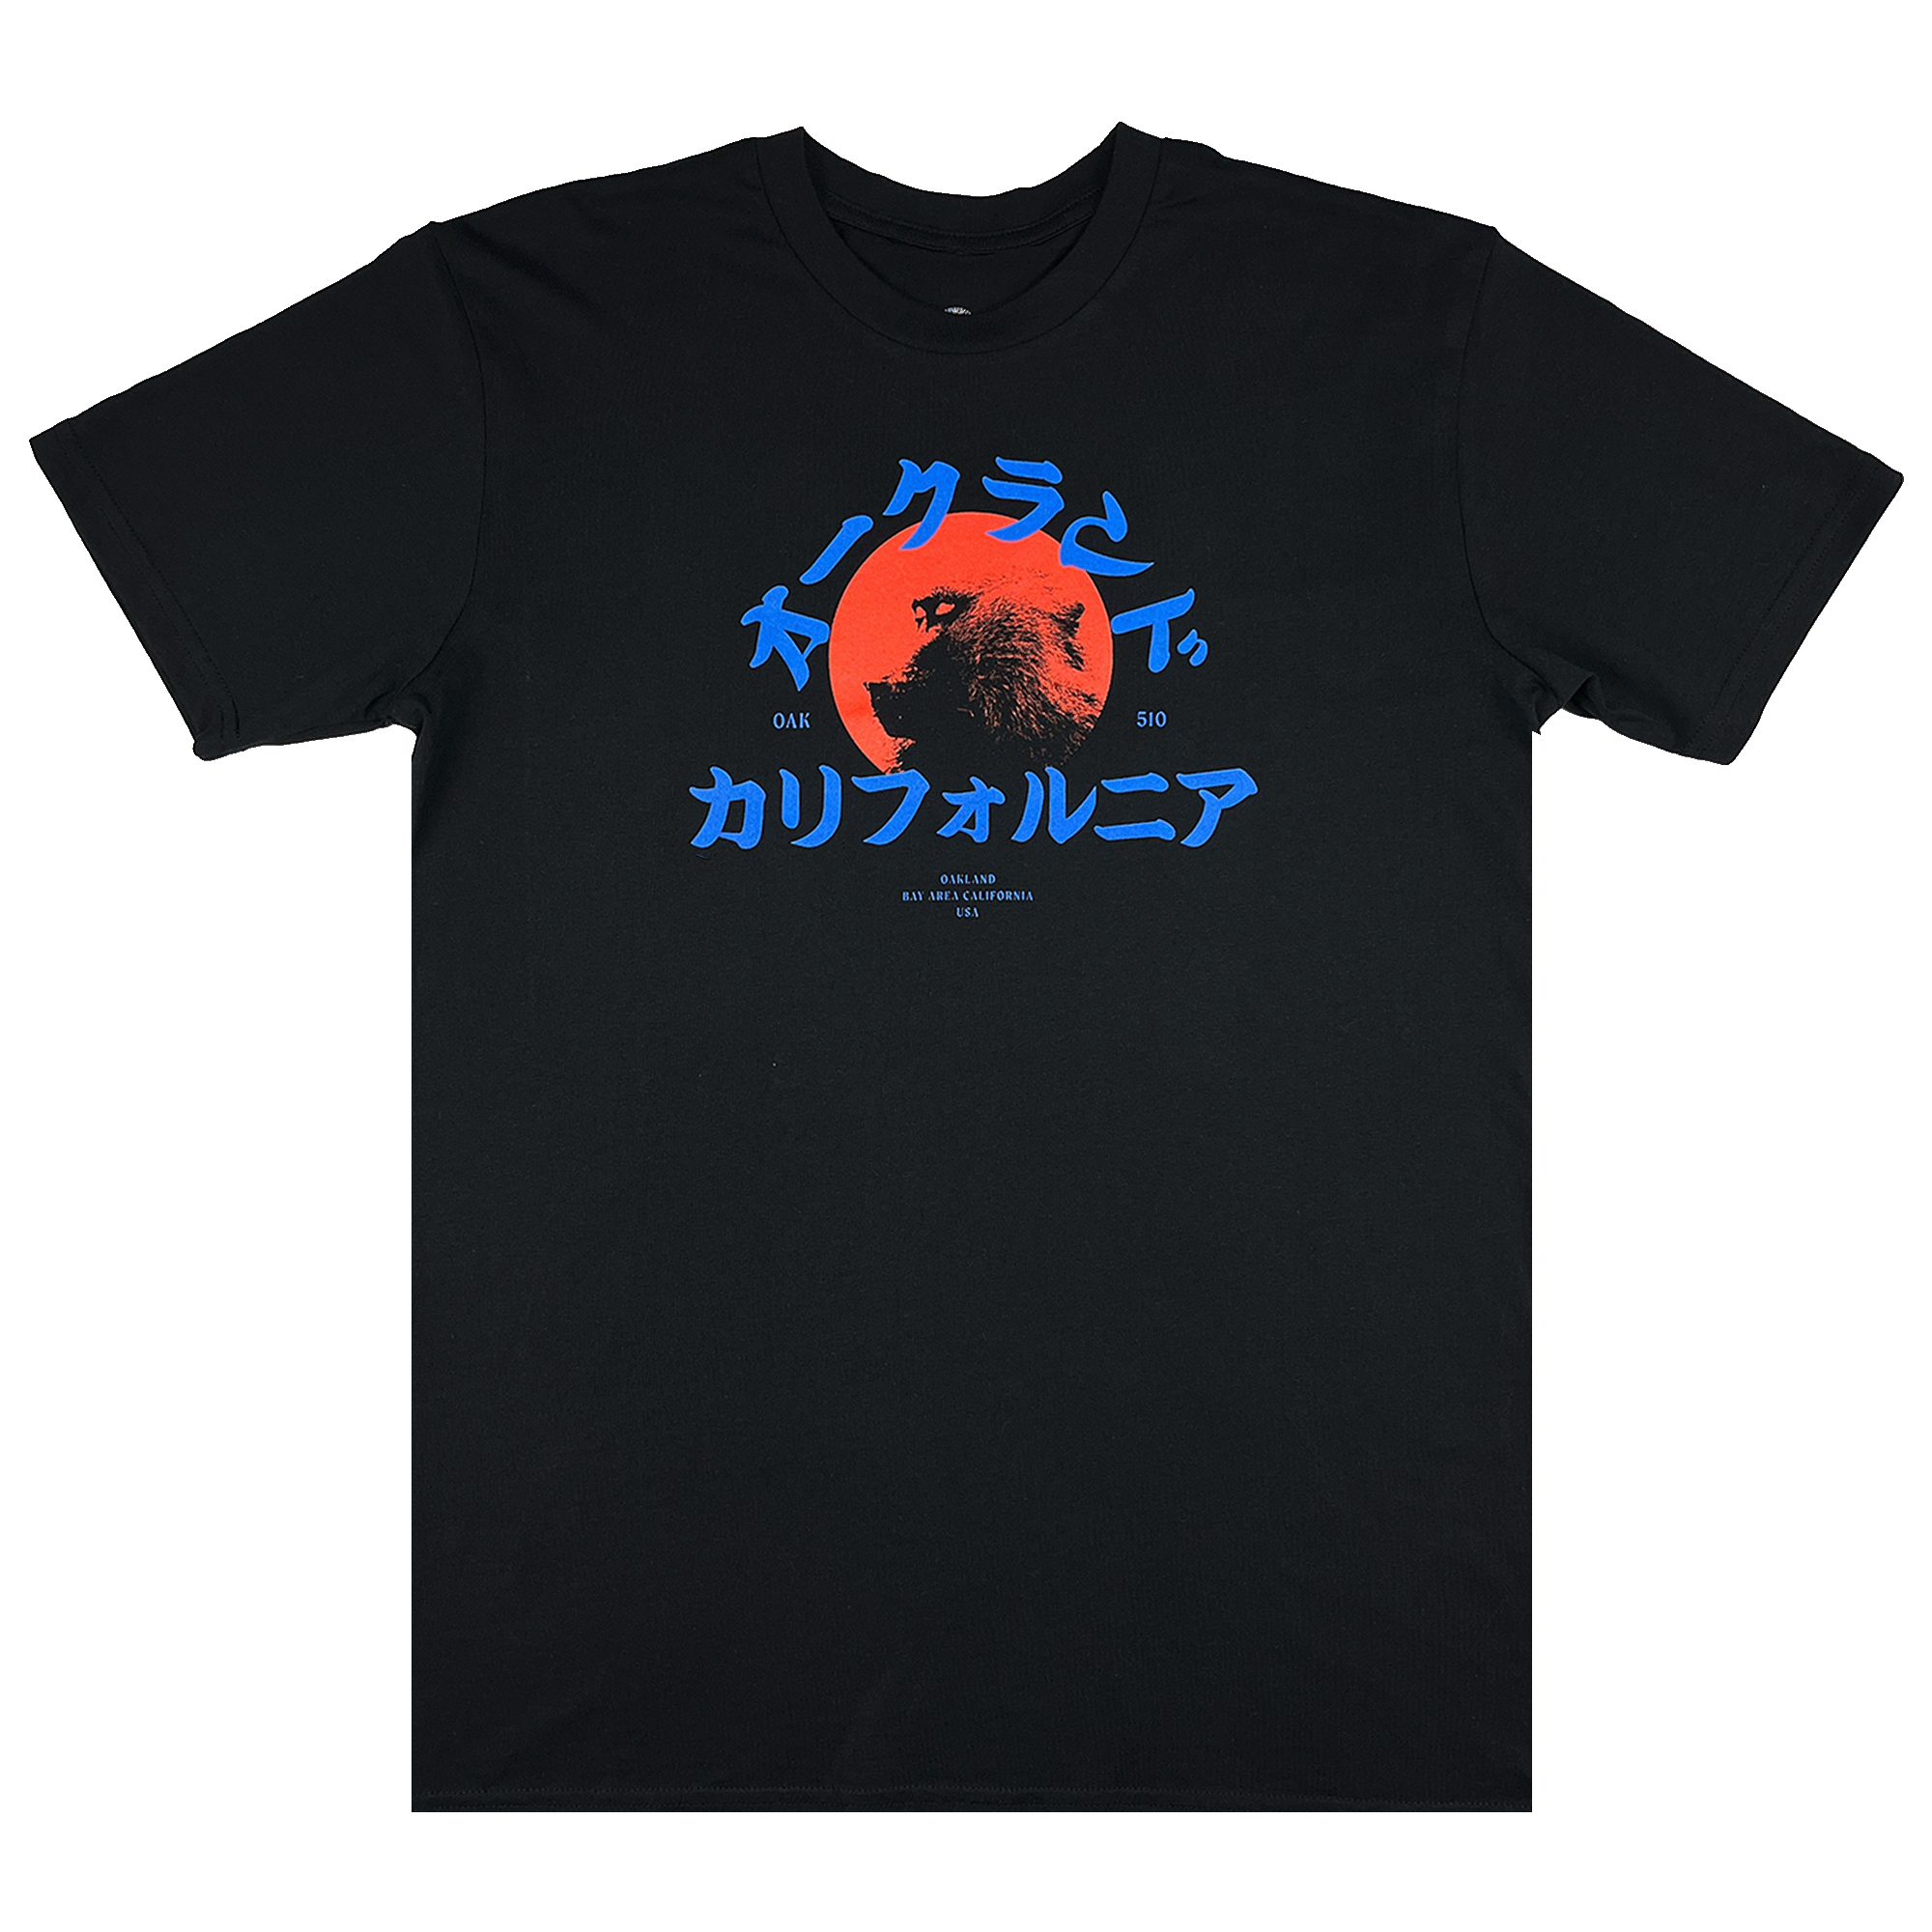  Black t-shirt with red snow monkey graphic and blue Asian written characters.